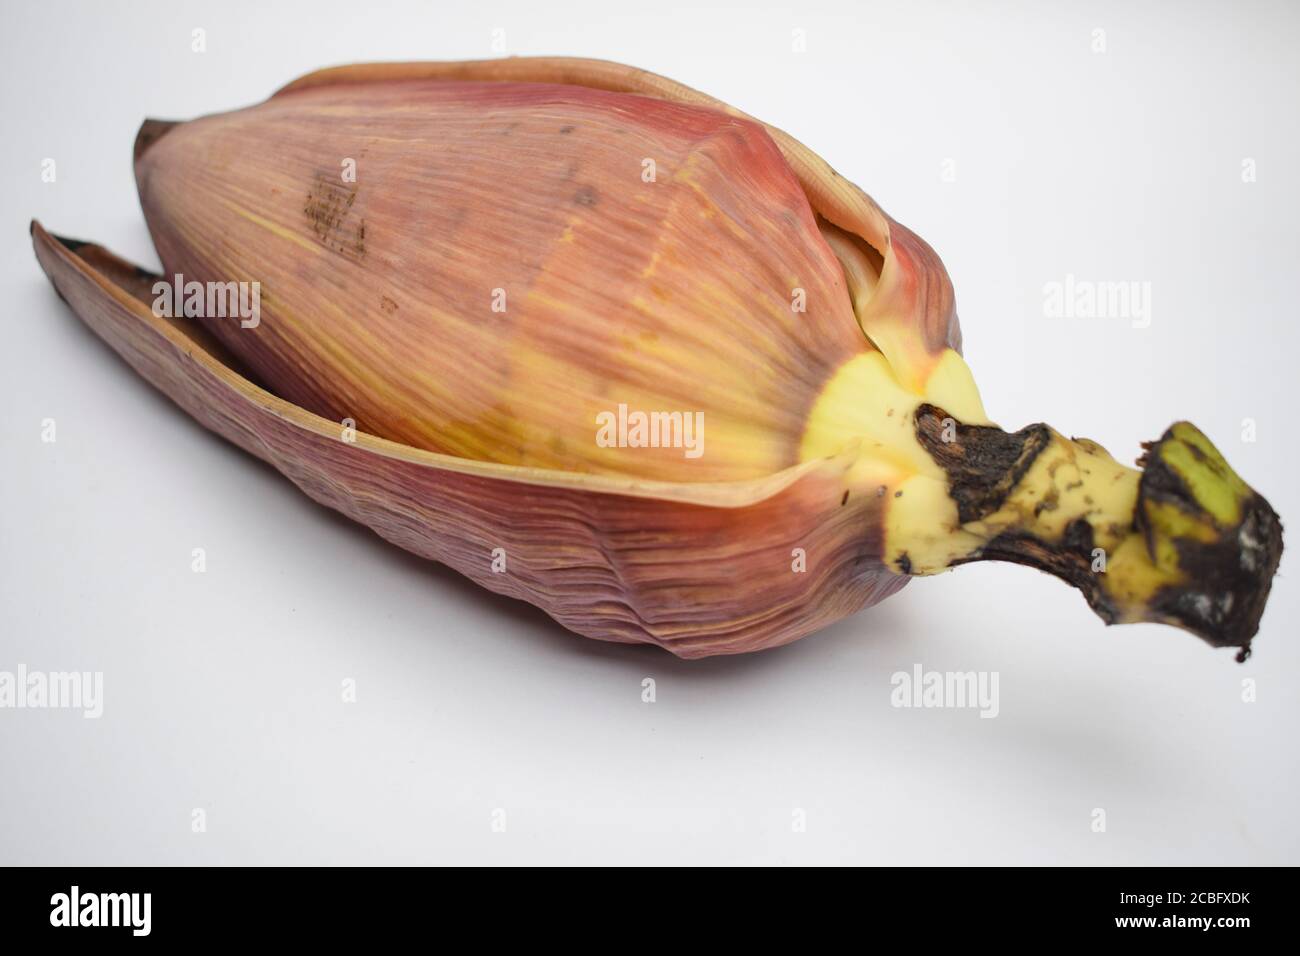 Raw Banana flower opened leaves on white background. Also known as banana blossoms eaten in cuisine cooked in South Asia Stock Photo